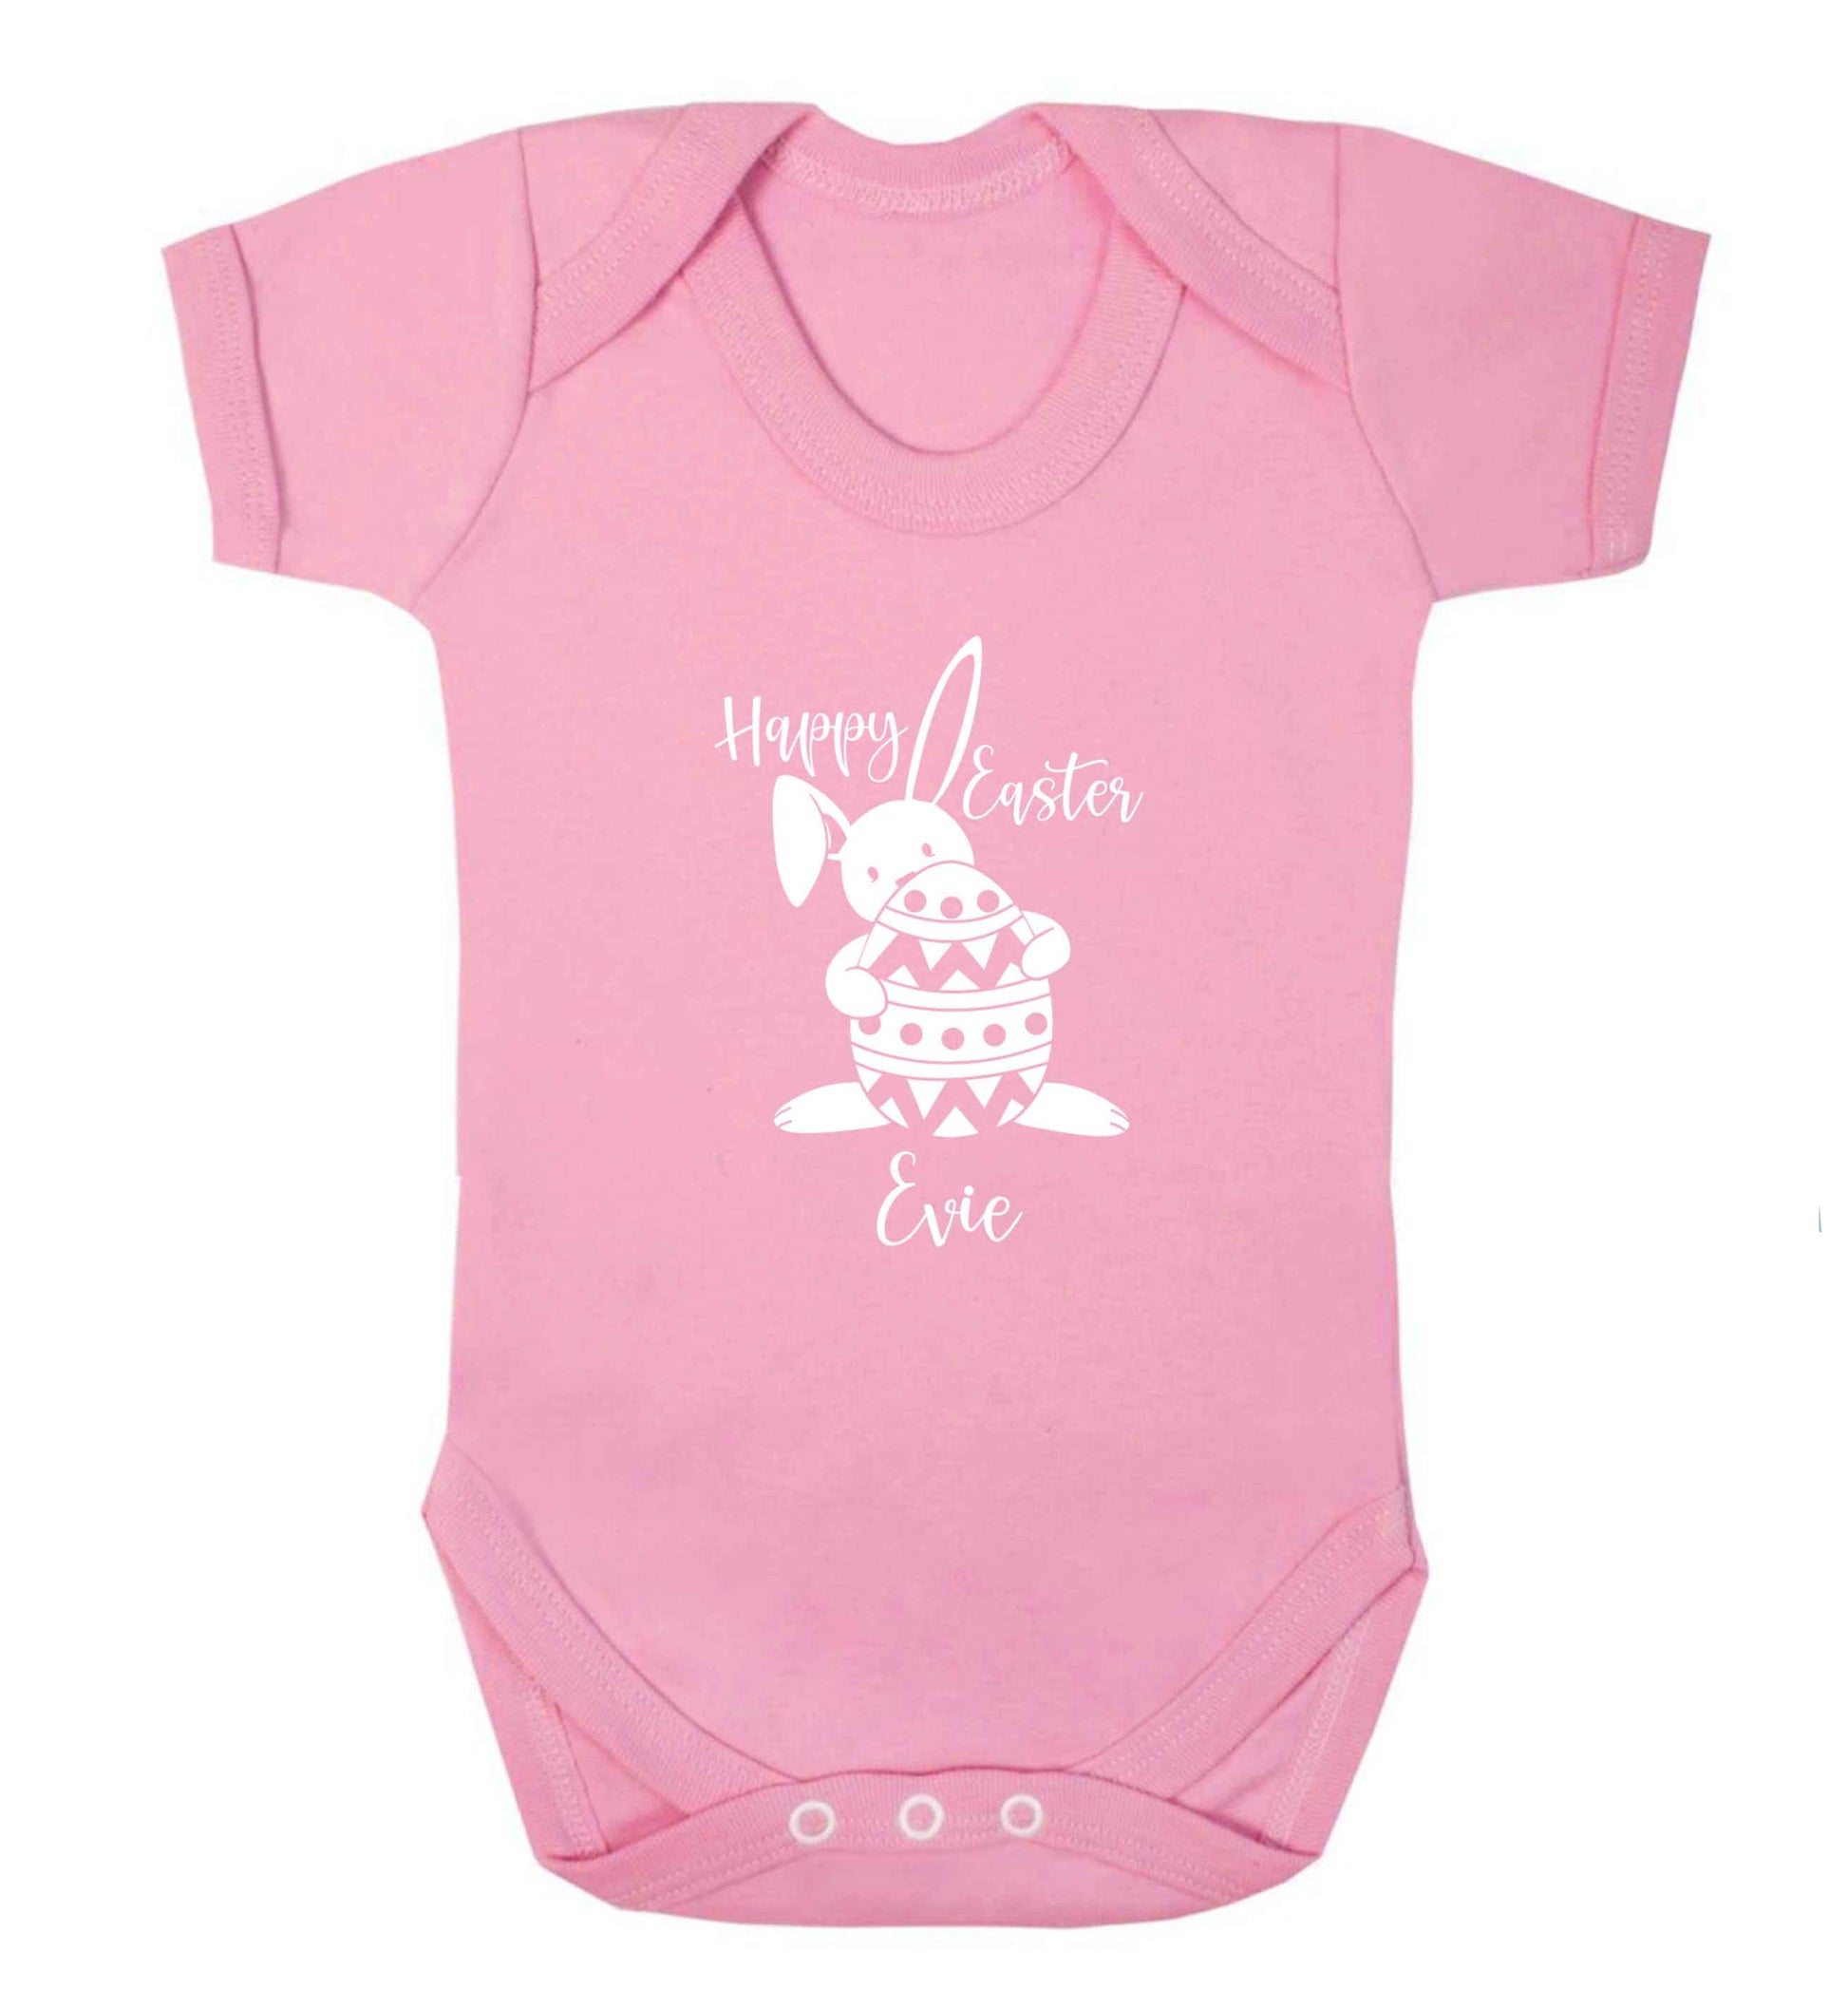 Happy Easter - personalised baby vest pale pink 18-24 months